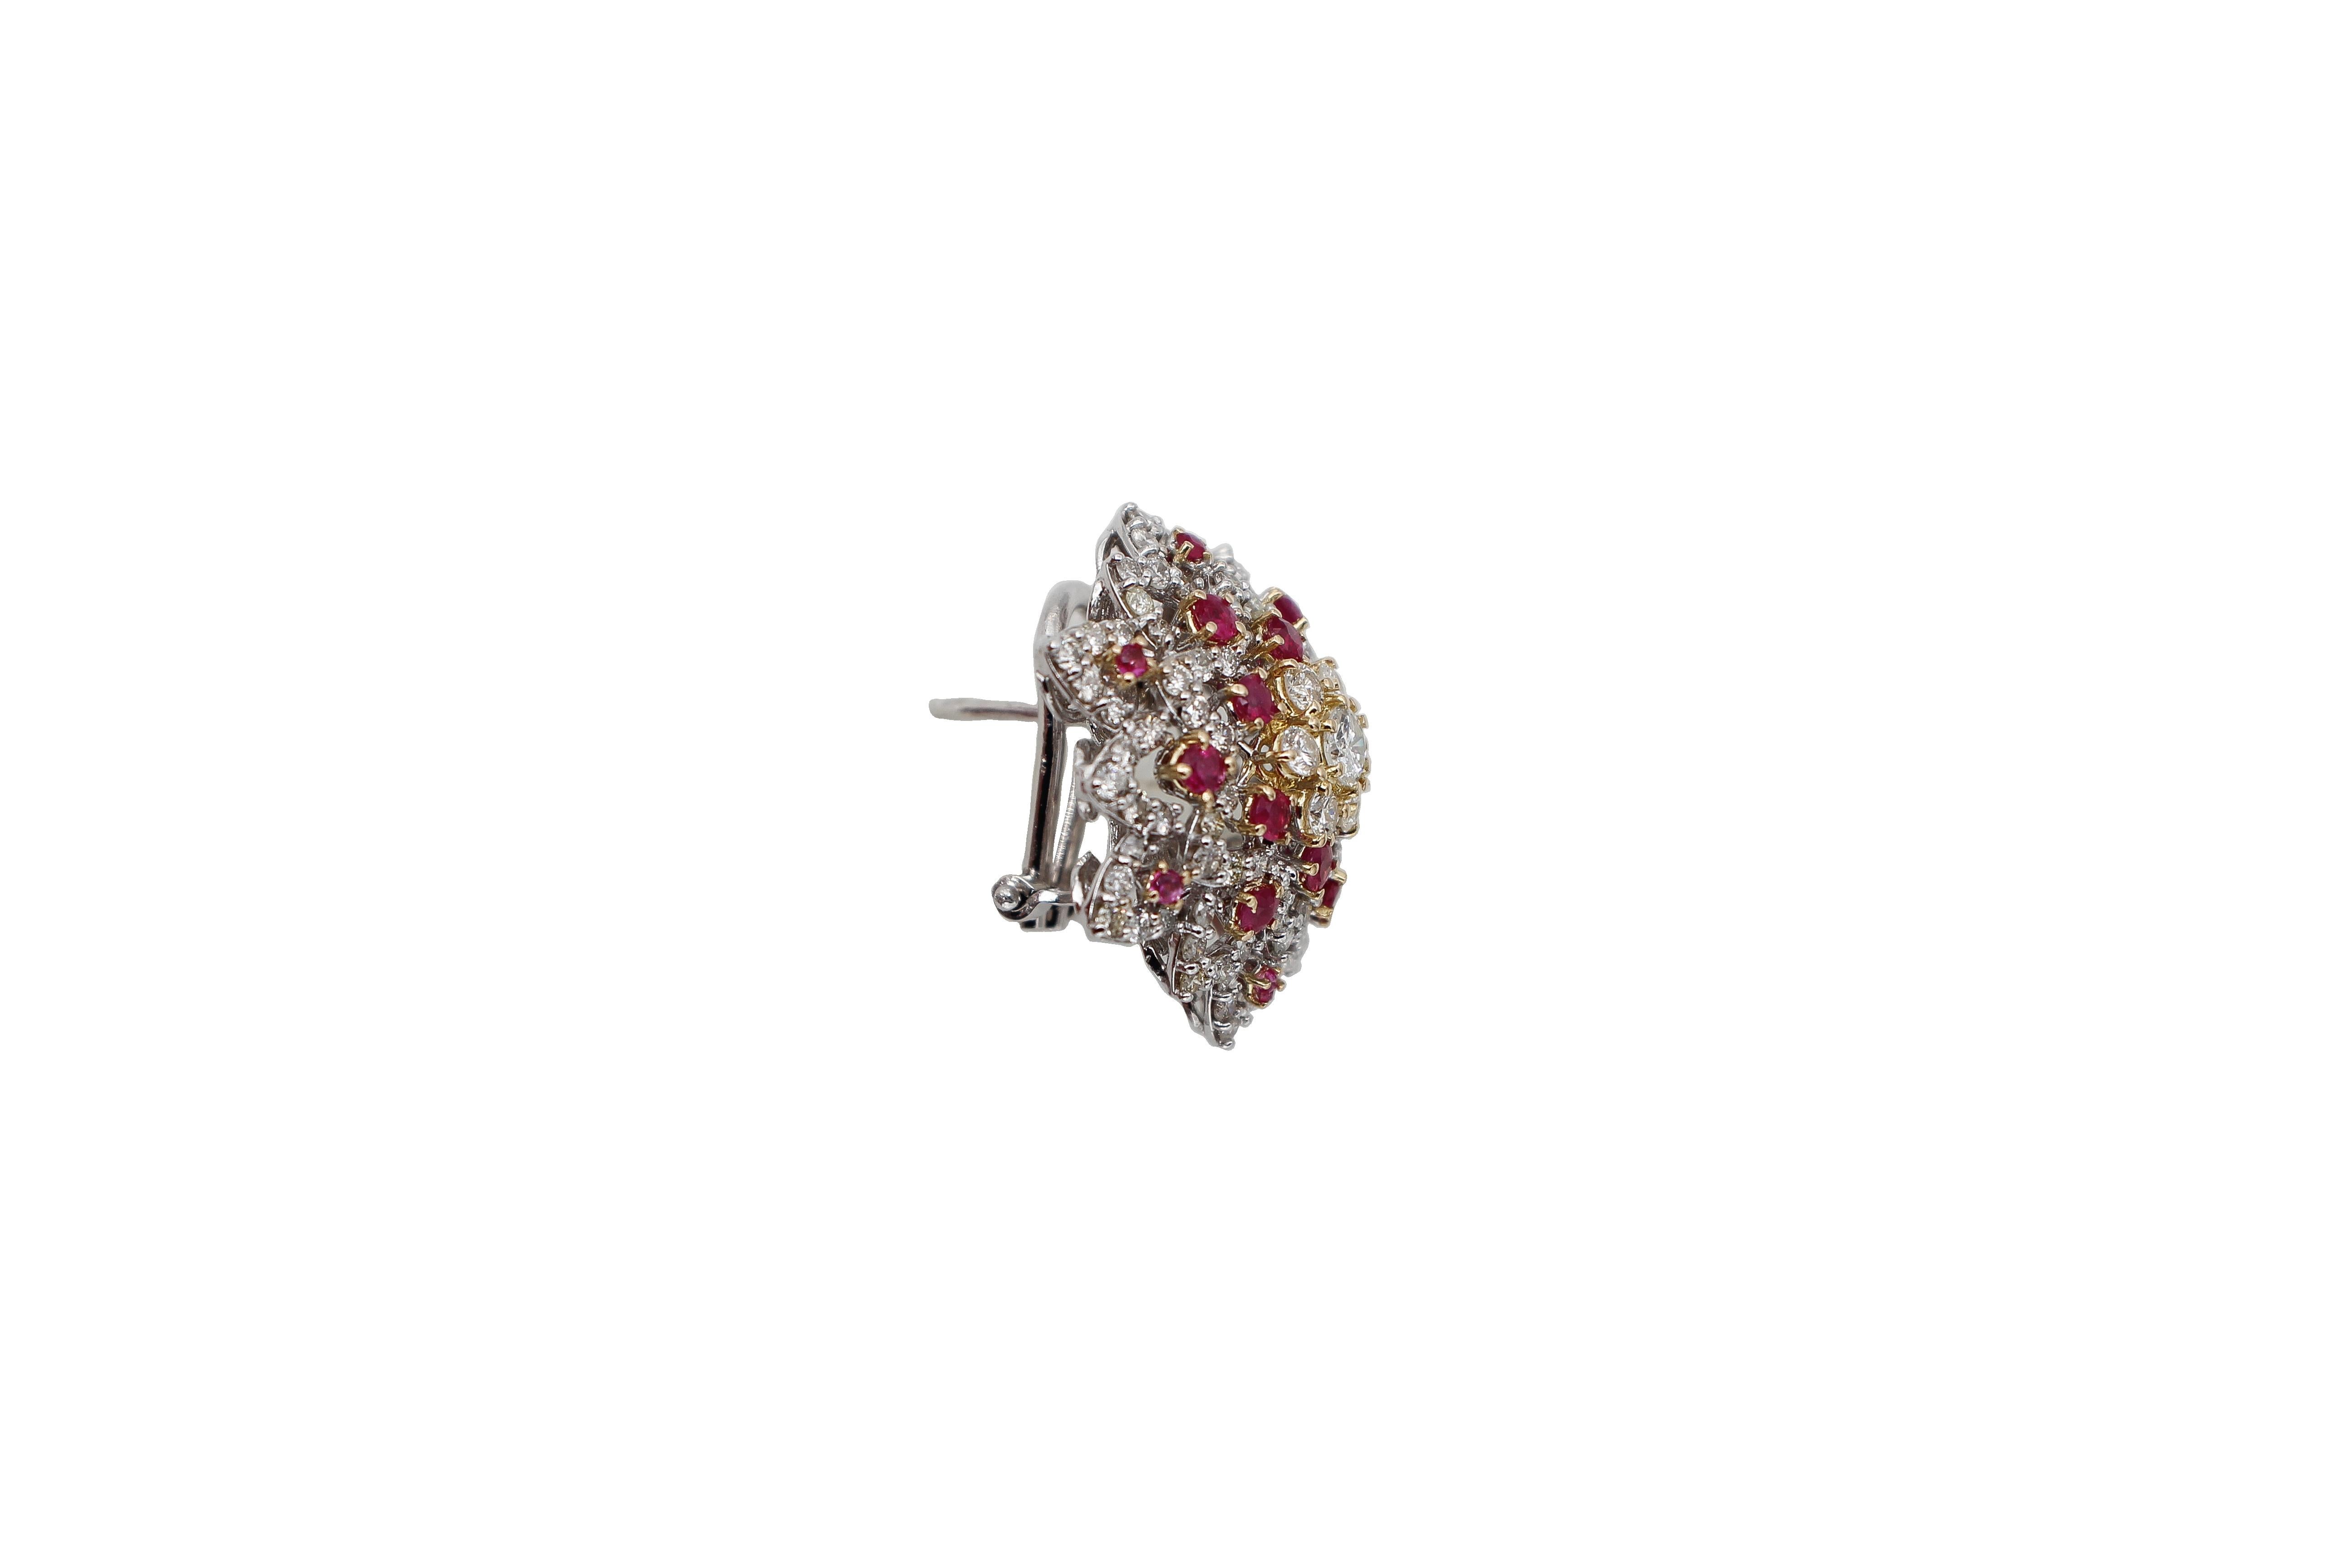 Retro Diamonds and Rubies, 18kt White/Yellow Gold Flower/Star Design Clip-On Earrings For Sale